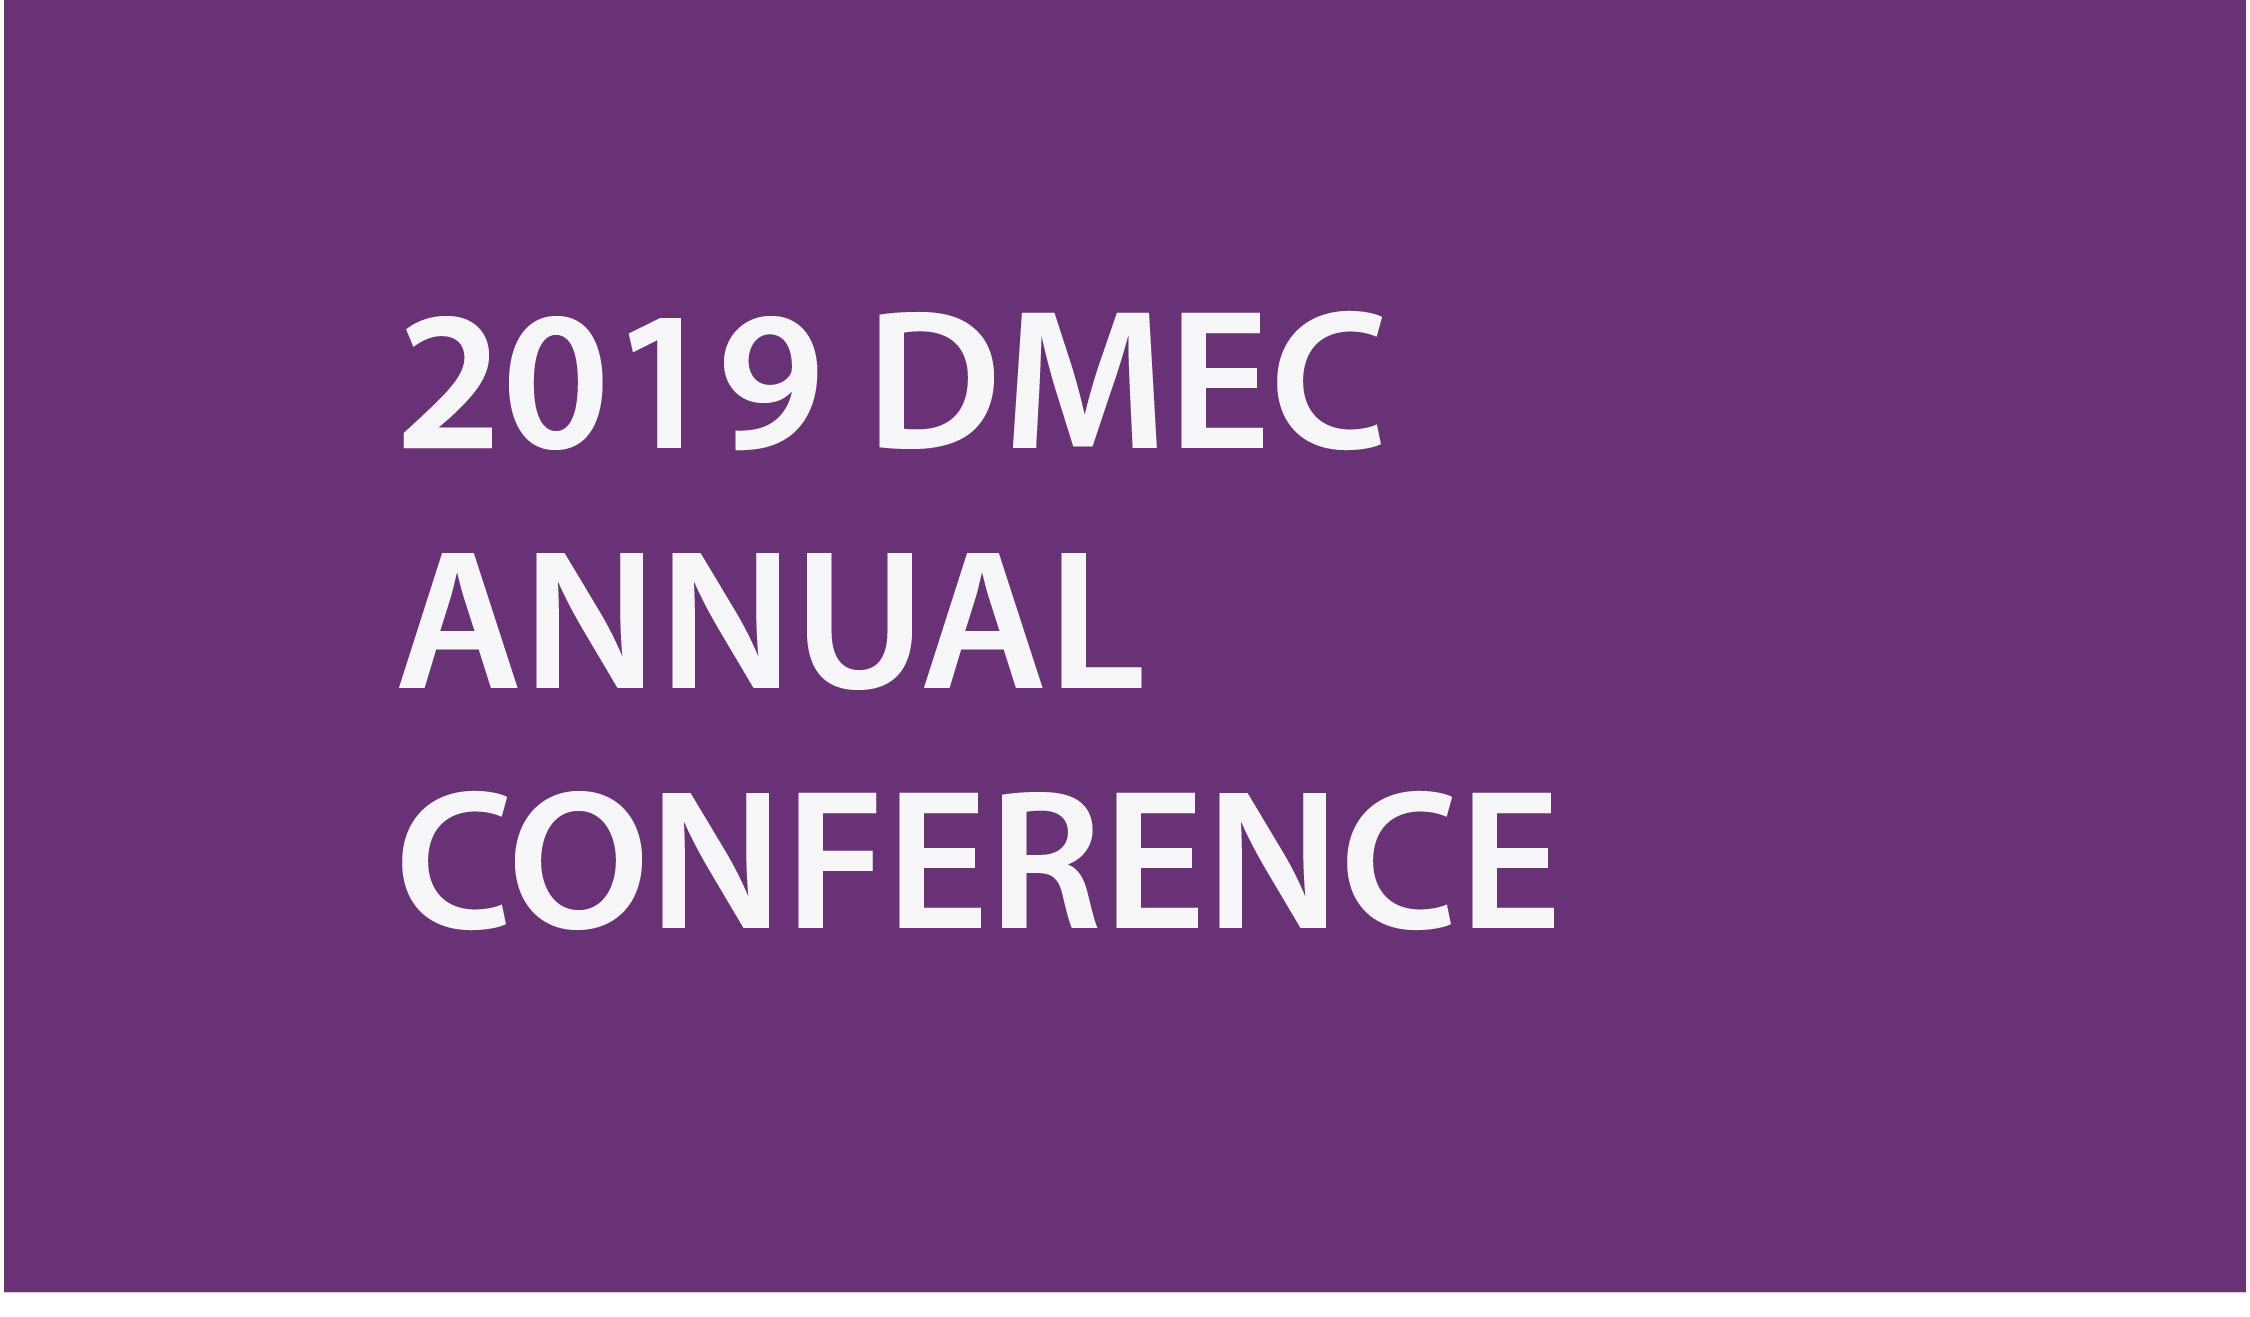 IEA Exhibiting at the 2019 DMEC Annual Conference